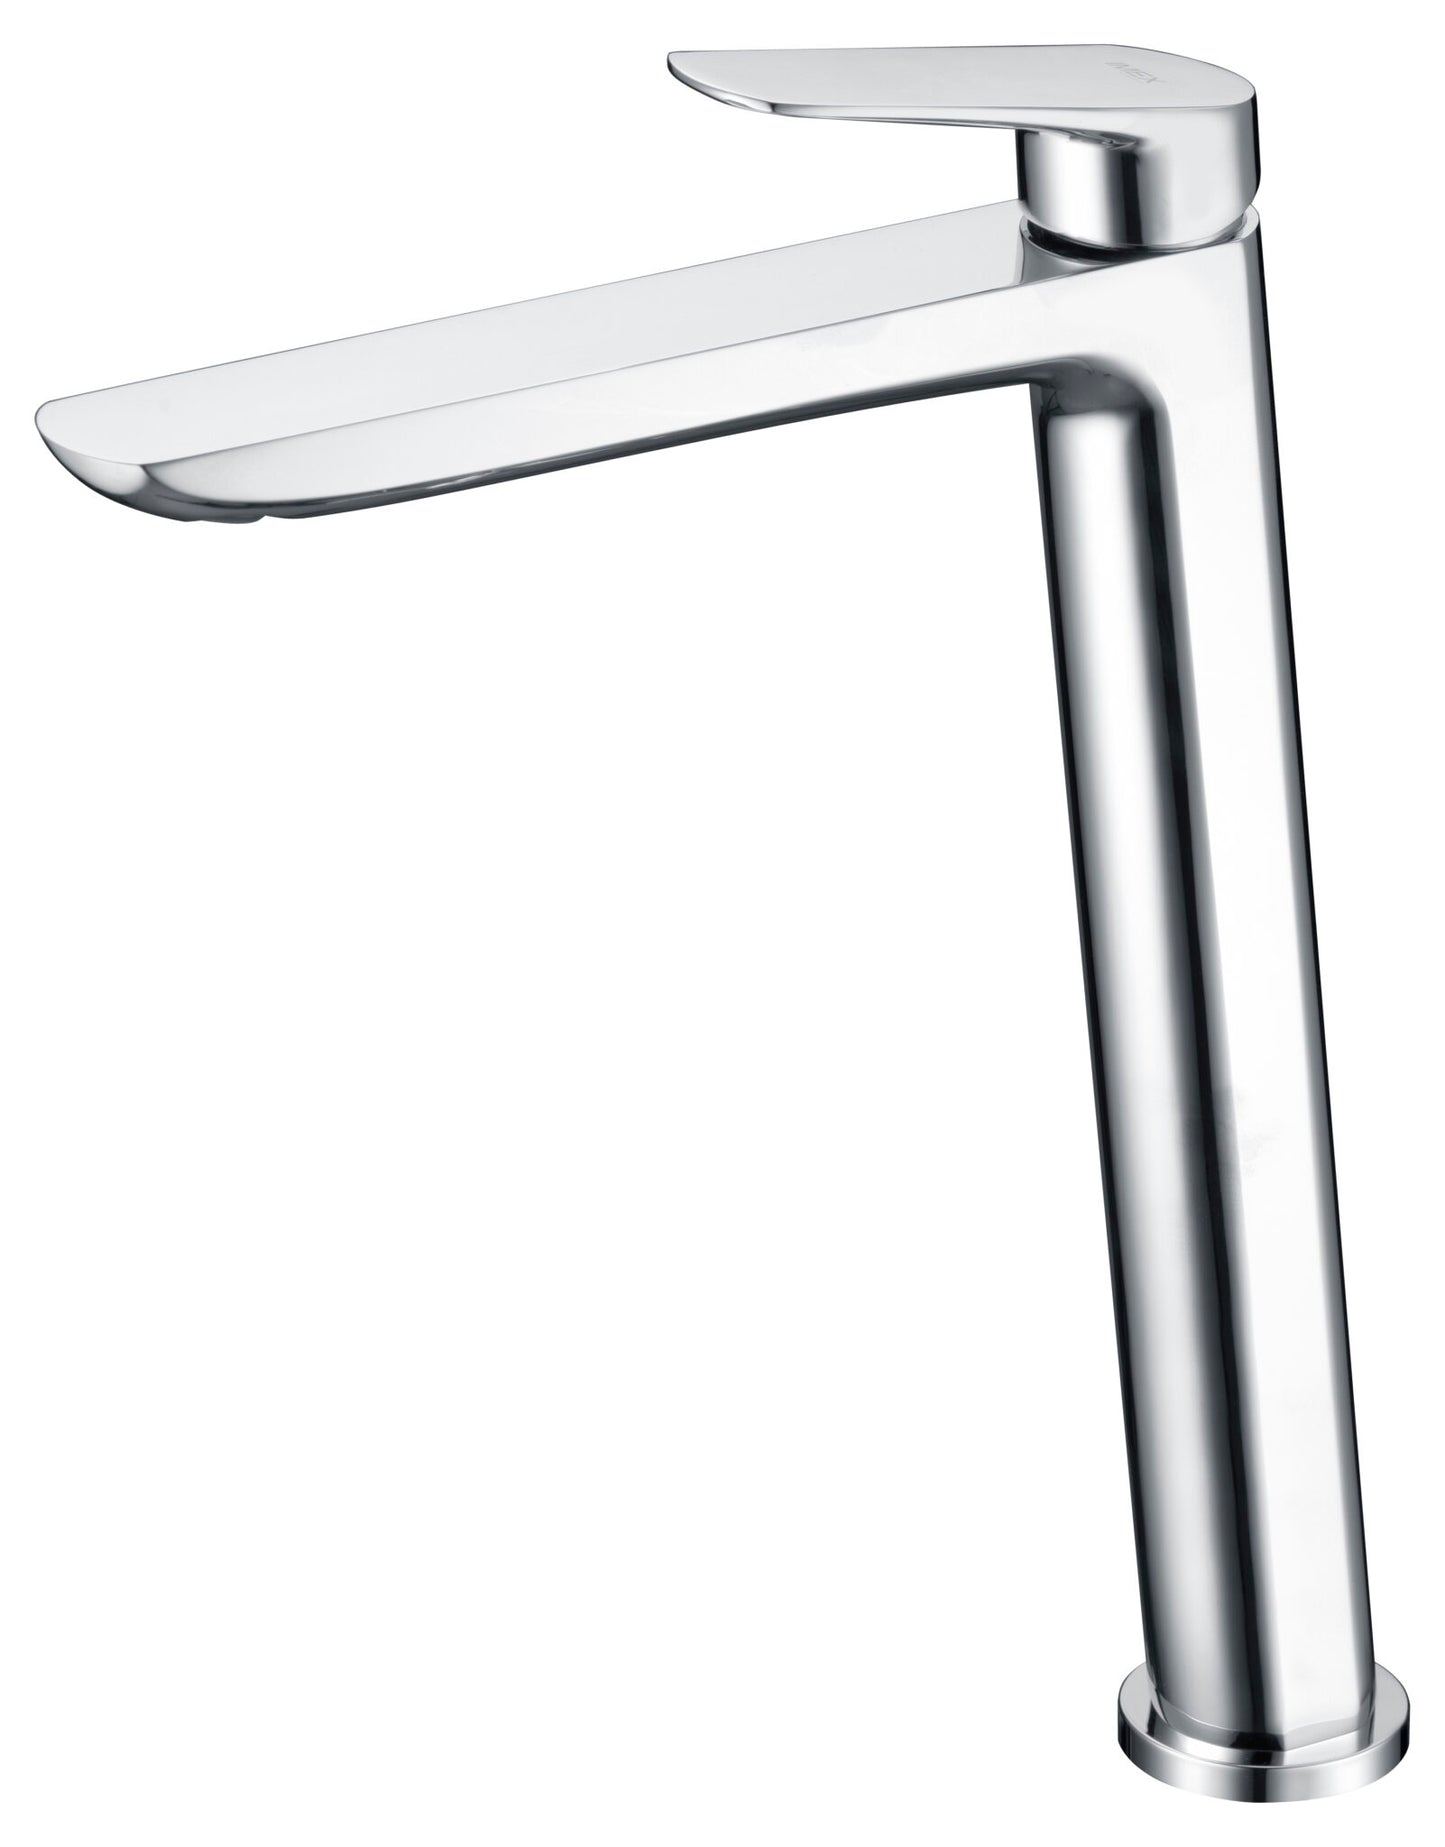 SINGLE-LEVER BASIN MIXER XL-SIZE WITH HIGH CHROME SPOUT